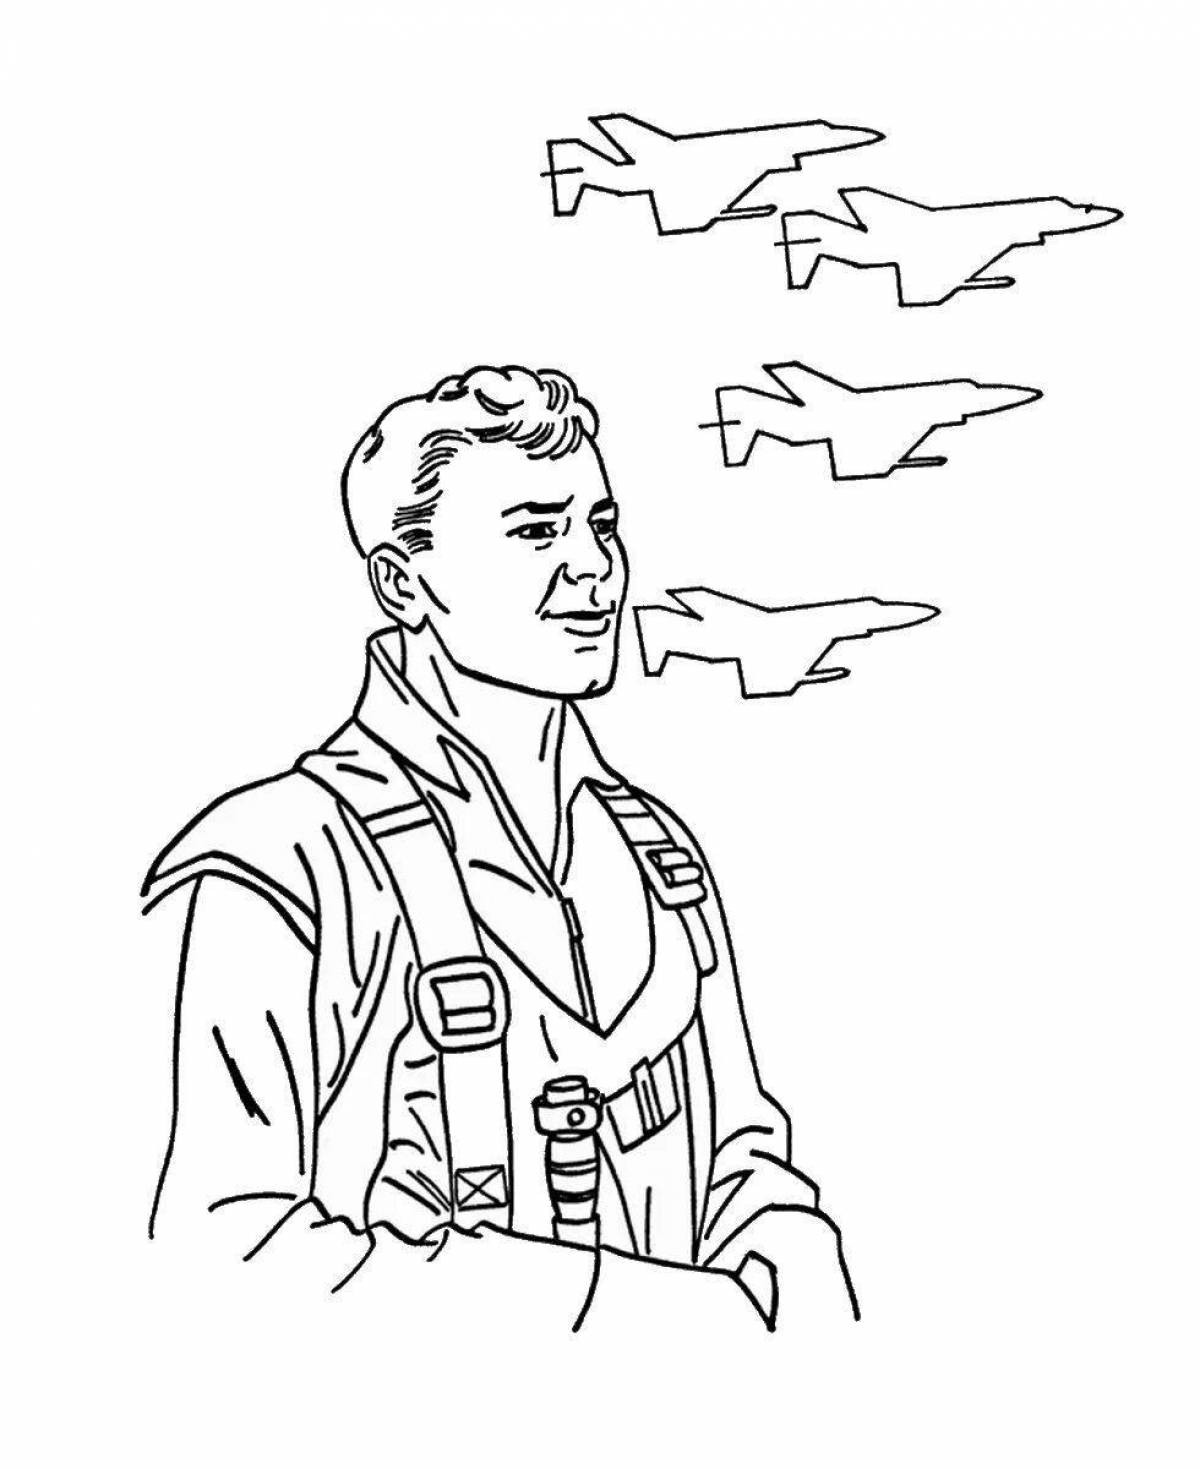 Shiny war heroes coloring pages for kids